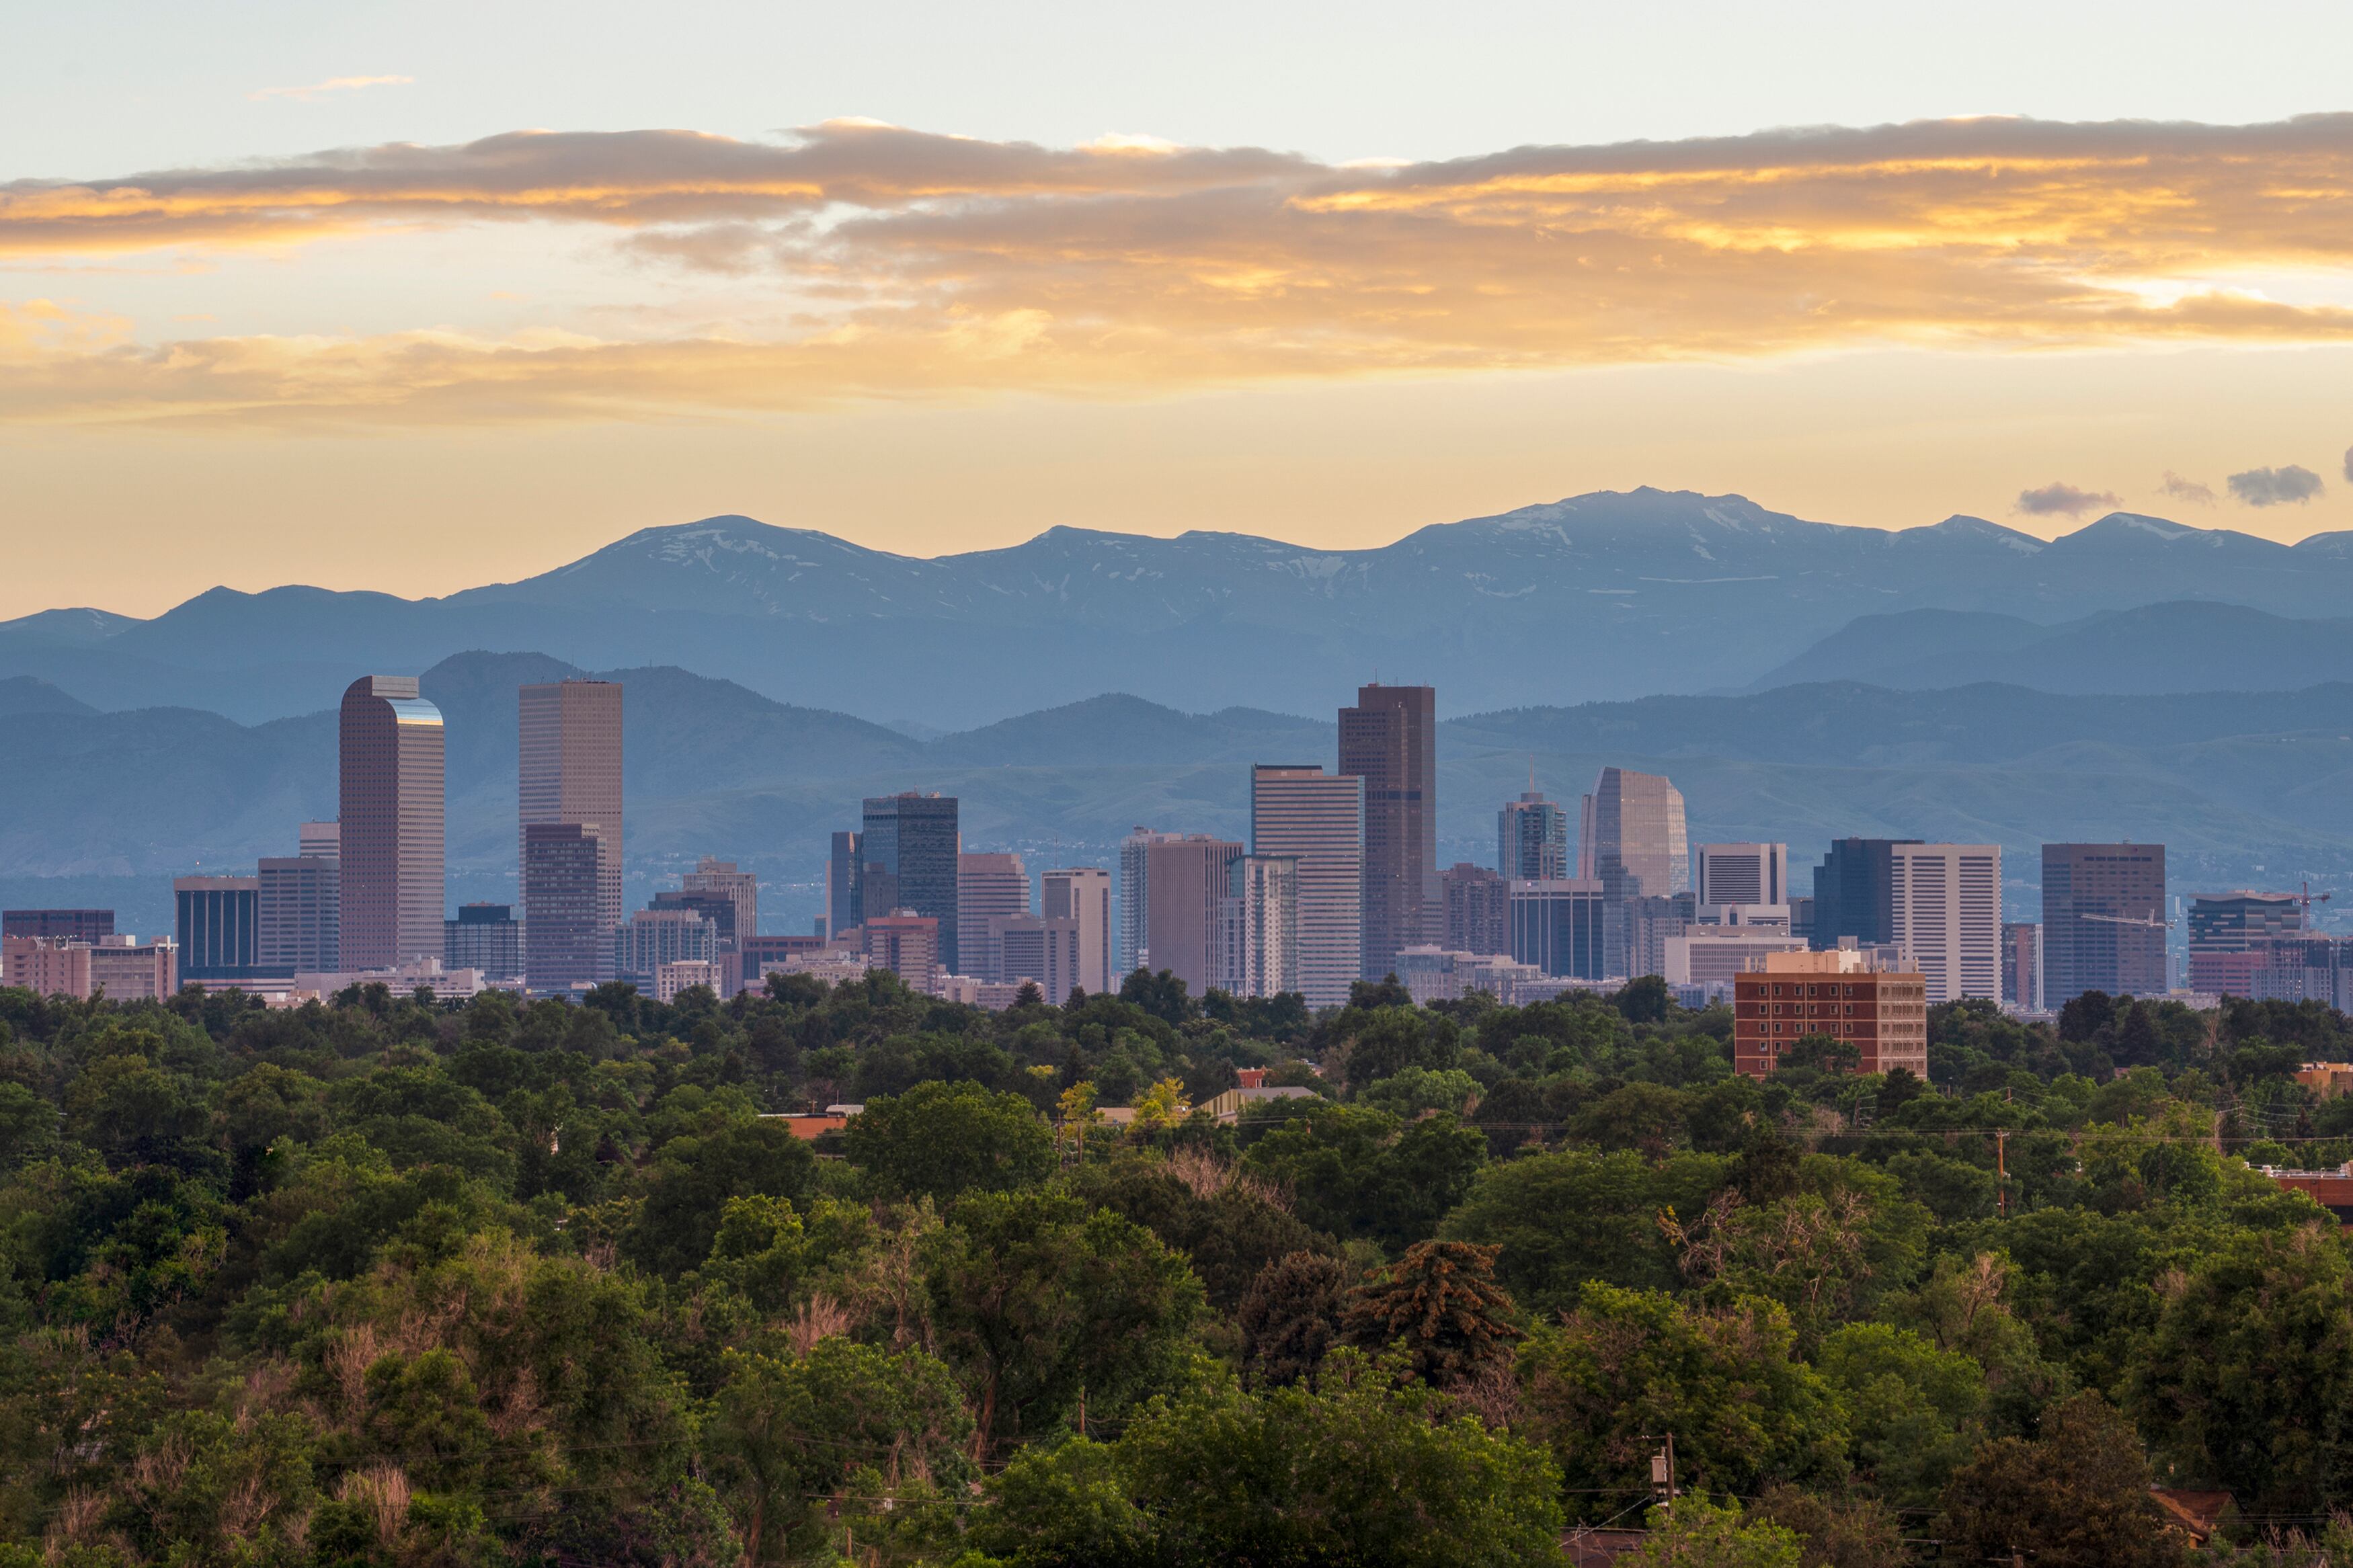 The Denver skyline sits in the middle of the frame with green trees in the foreground, blue mountains and a yellow sky in the background.